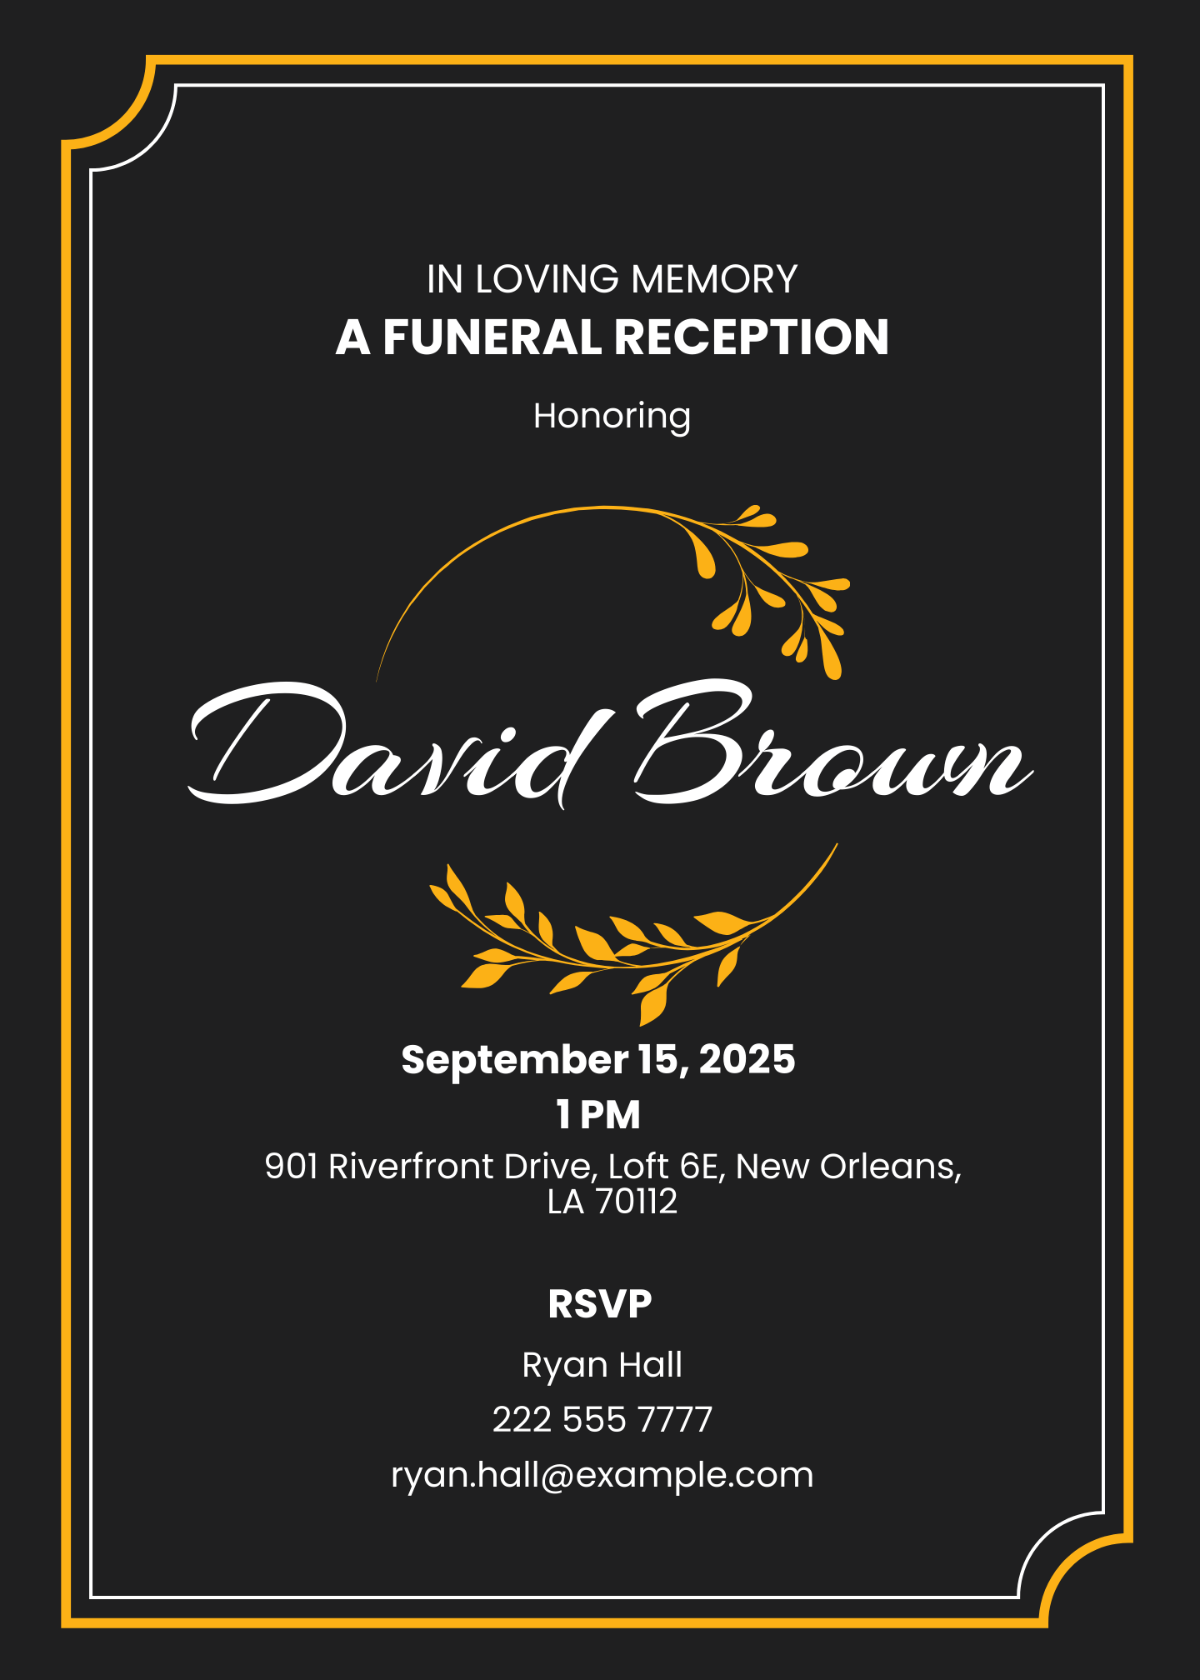 Email Funeral Reception Invitation